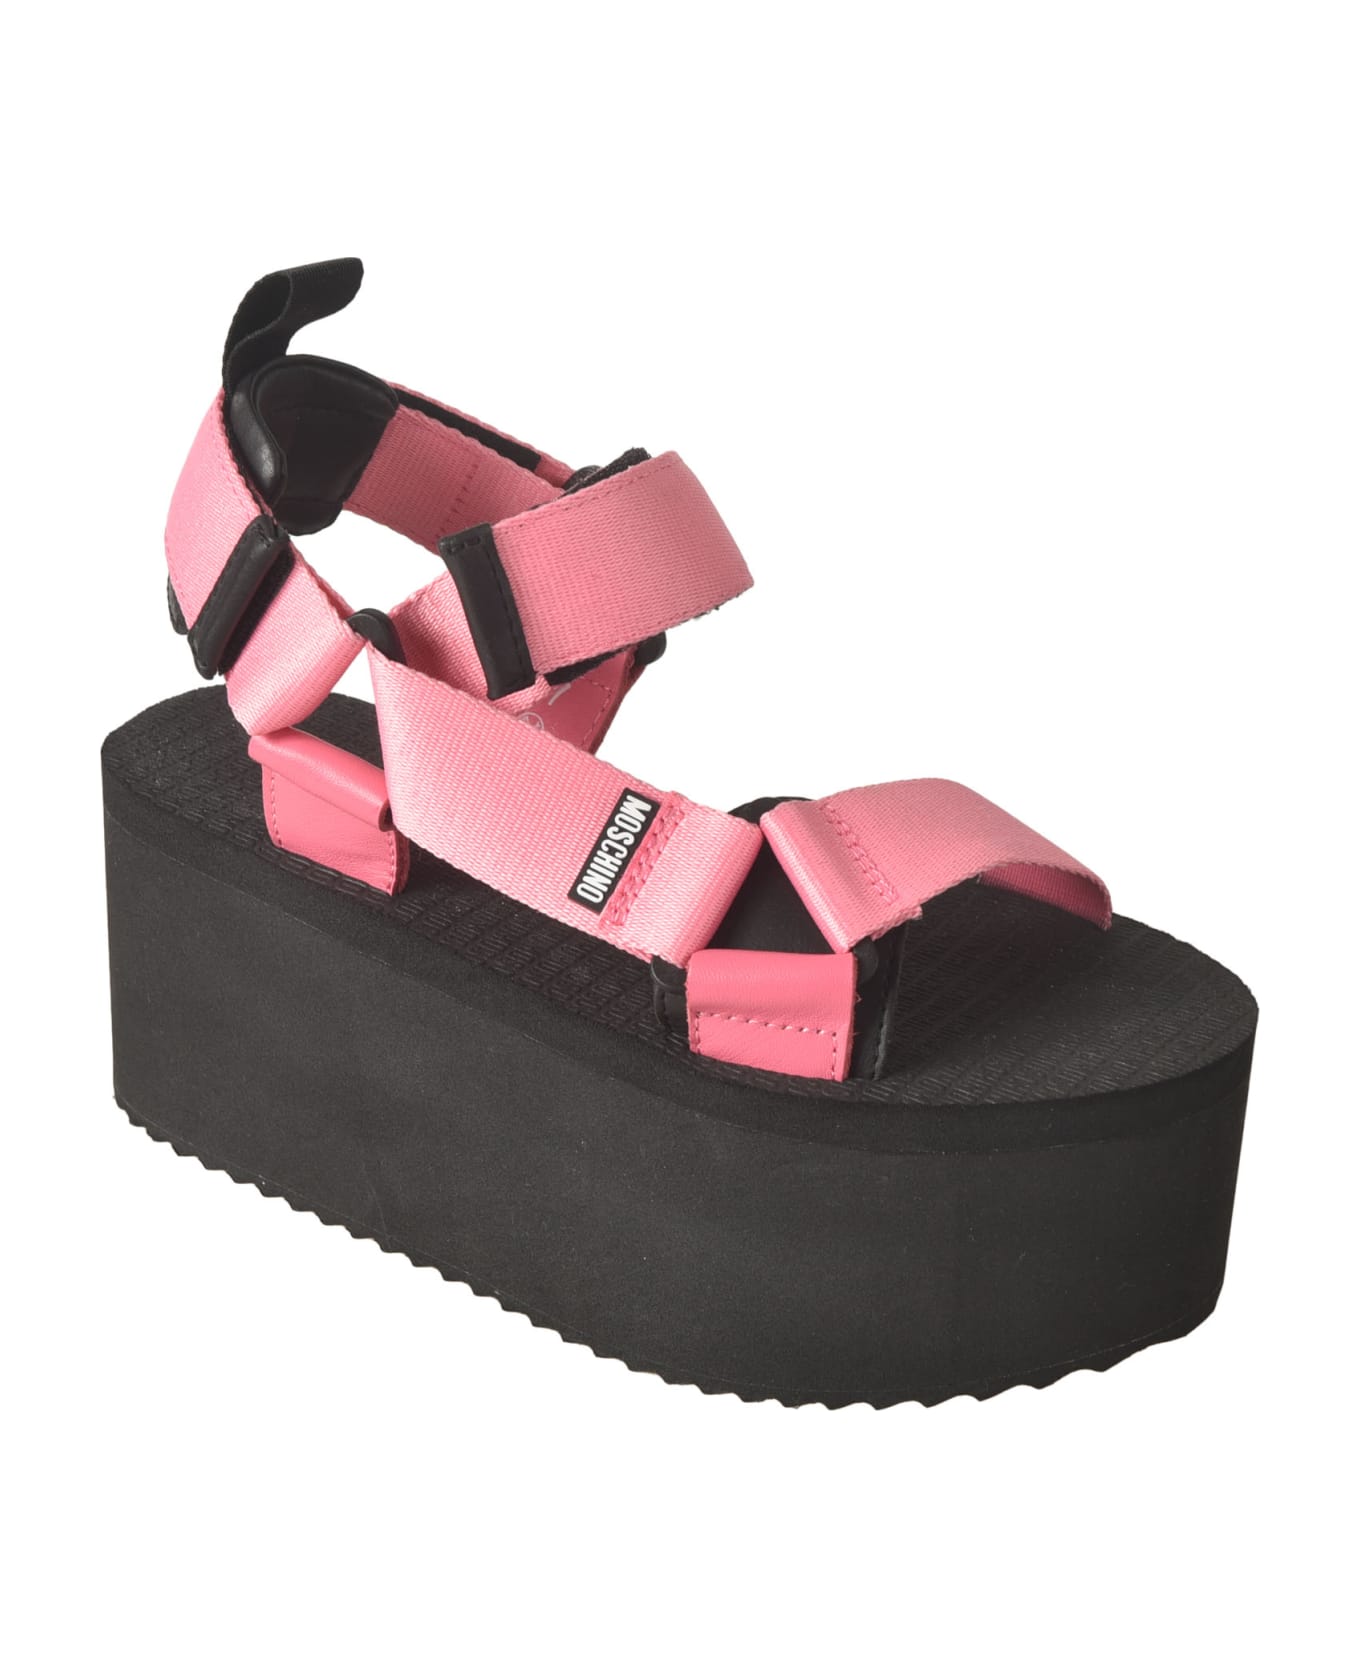 Moschino Strappy Wedge Sandals - Fantasia